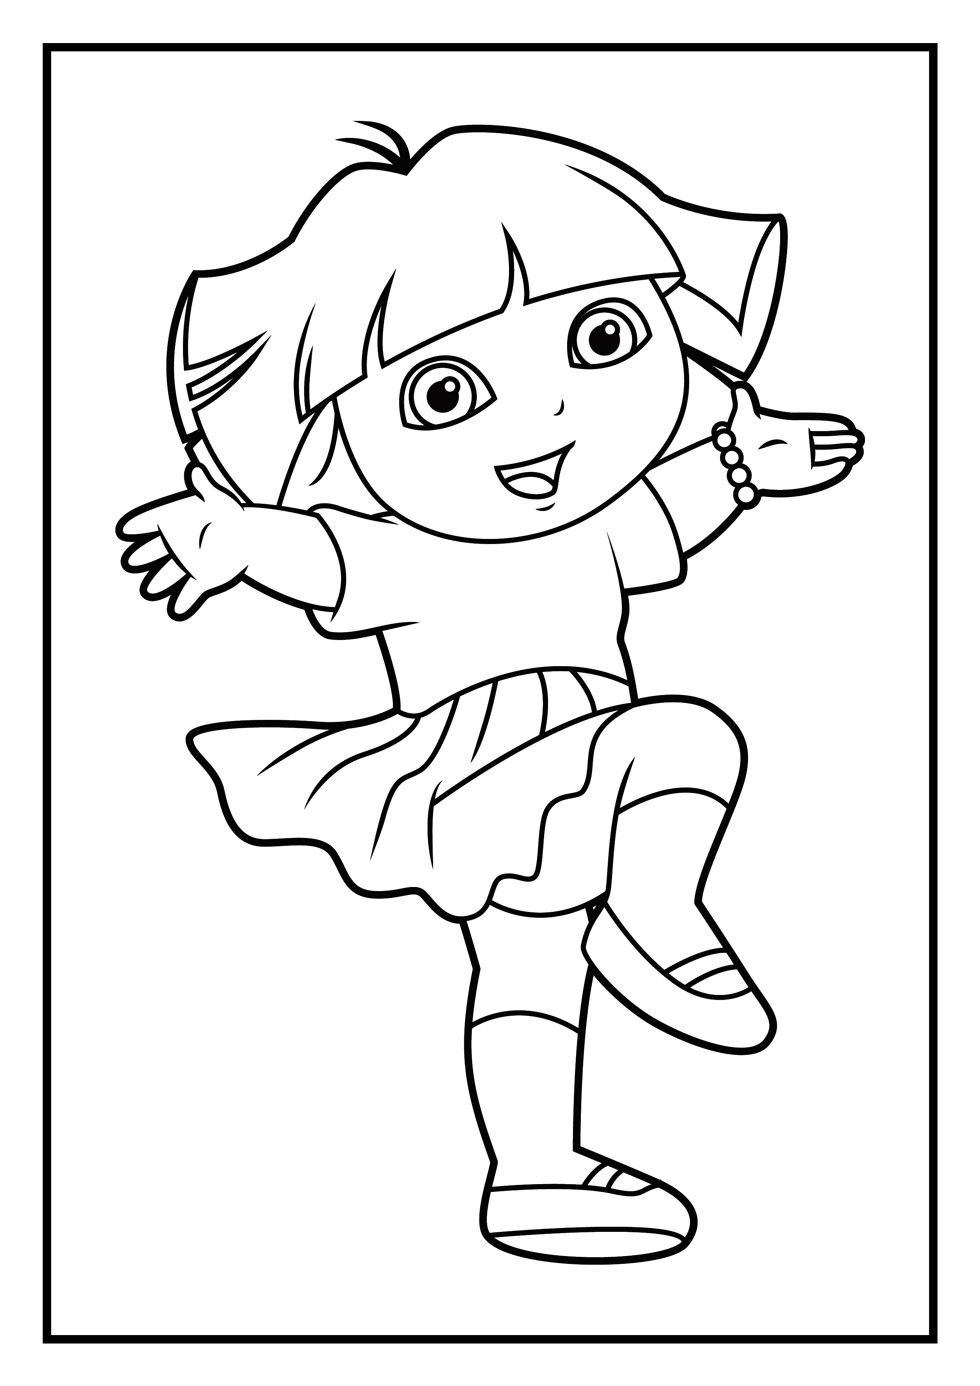 Dora Printable Coloring Pages
 Dora Coloring Pages